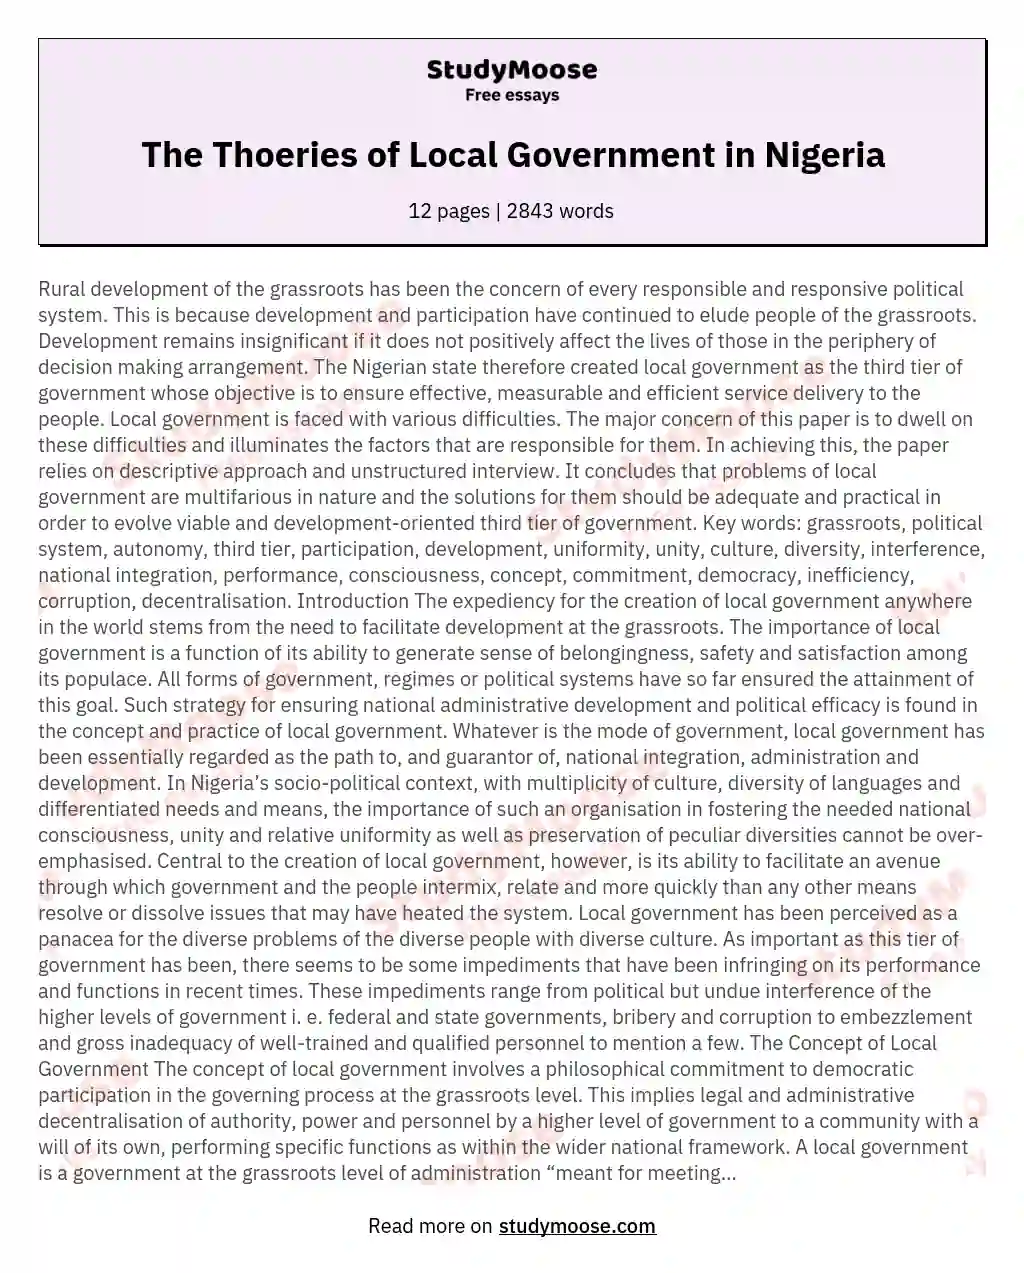 The Thoeries of Local Government in Nigeria